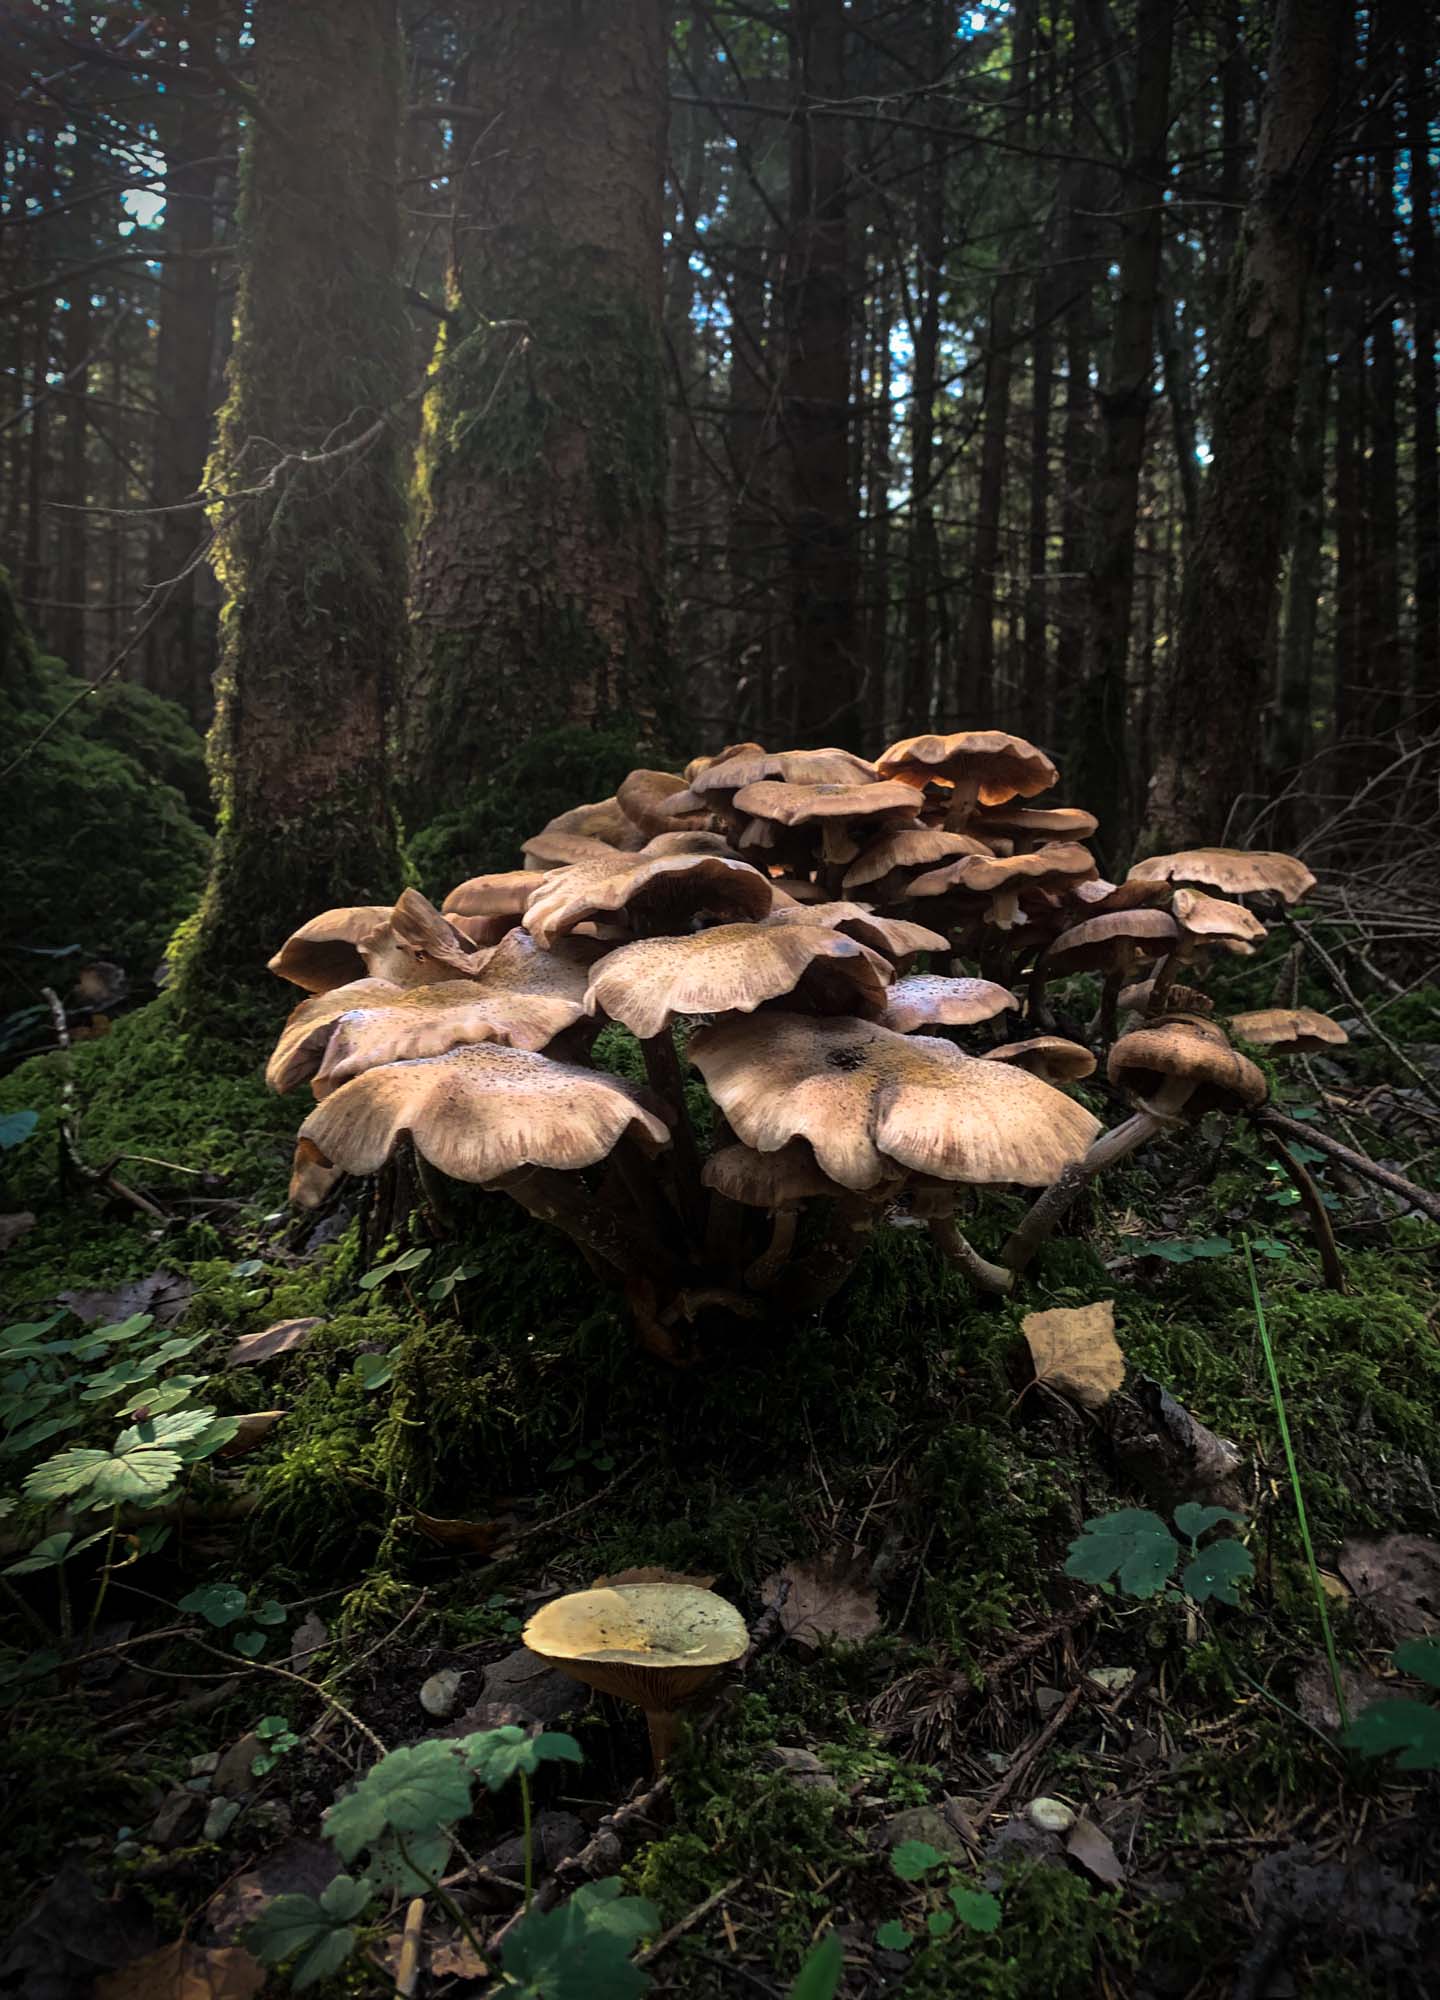 Group of mushrooms in a forest